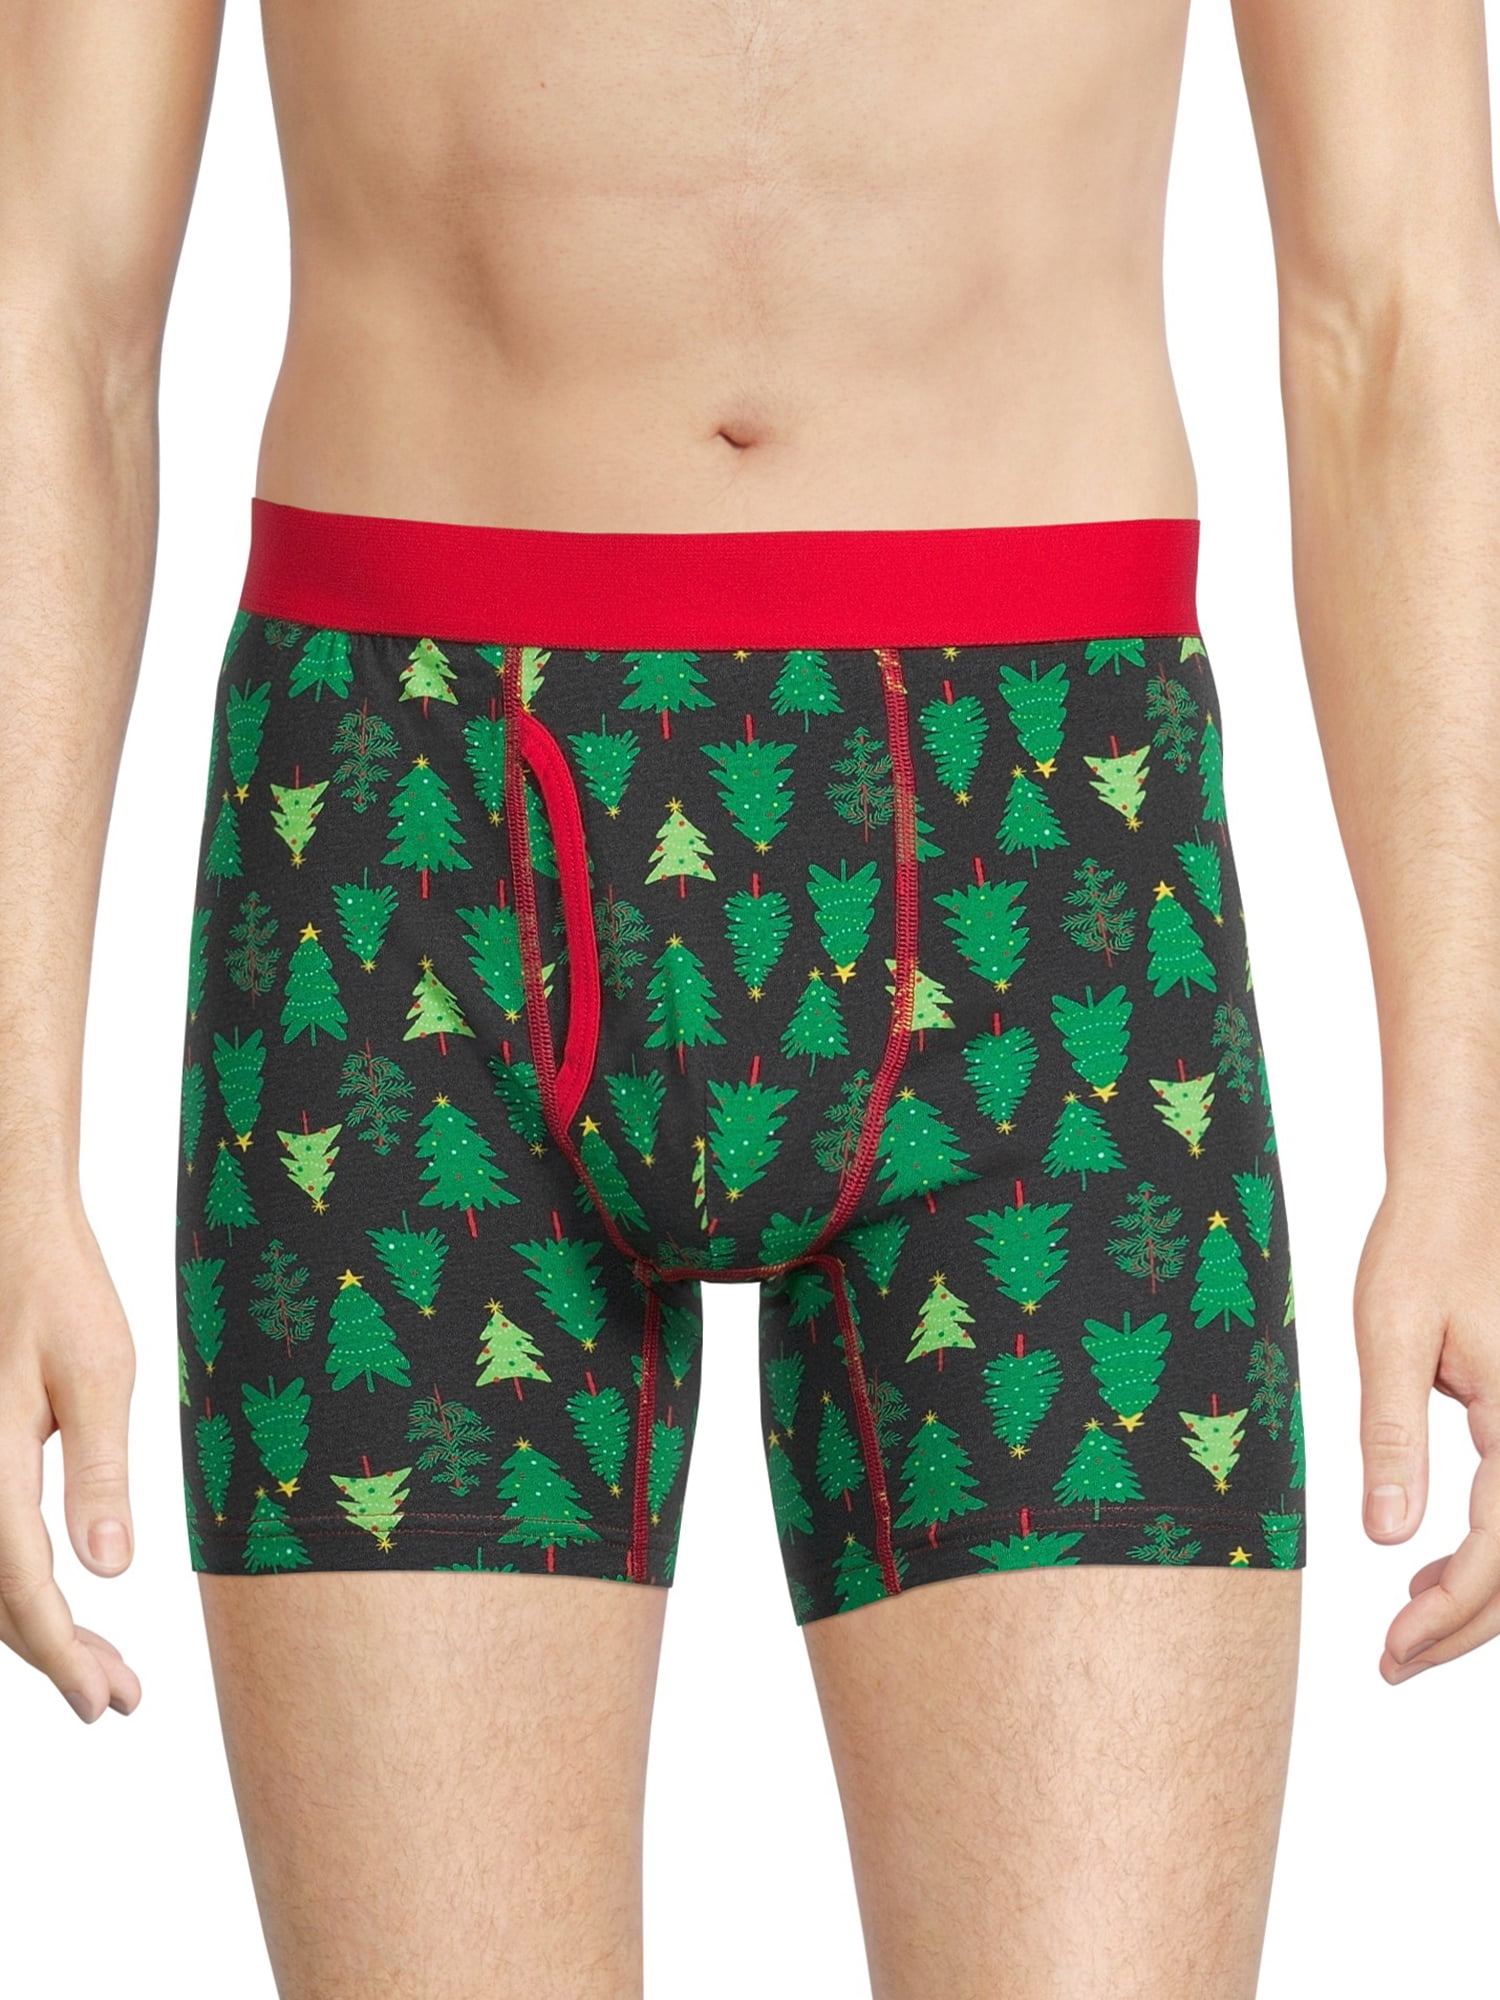 Holiday Time Men's Printed Tag-Free Stretch Boxer Briefs, Sizes S